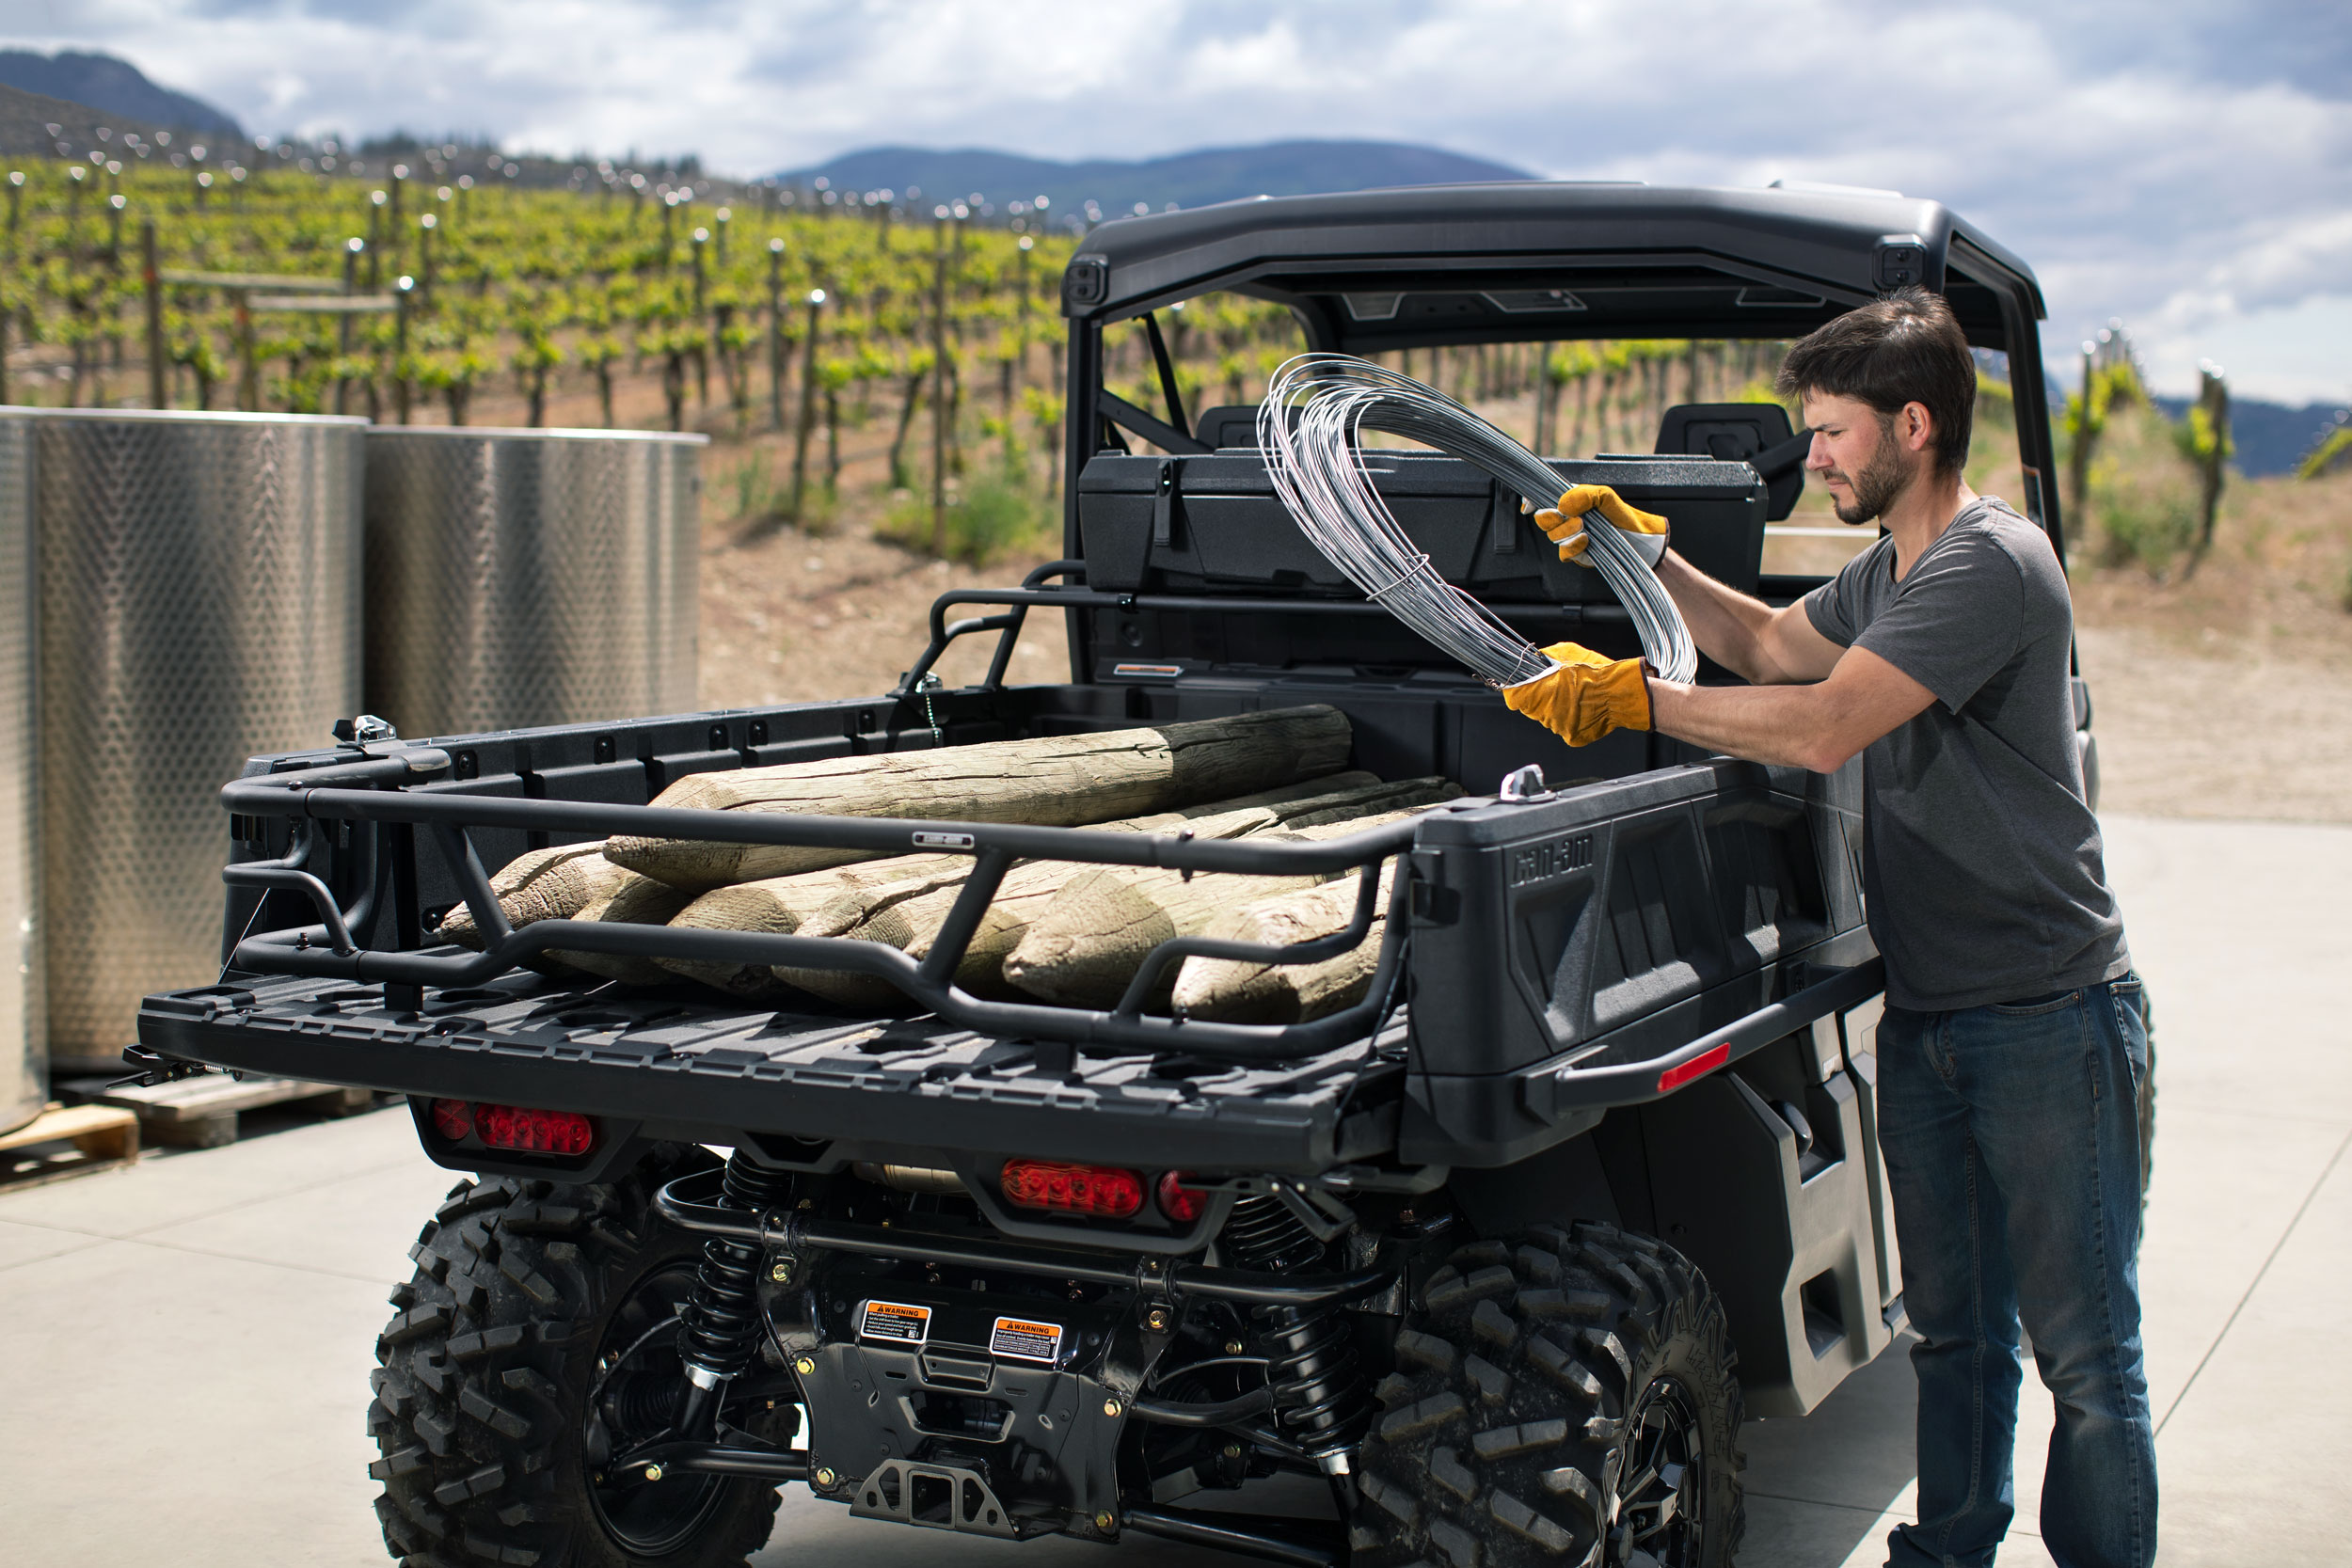 Can-Am Defender by workers in a vineyard